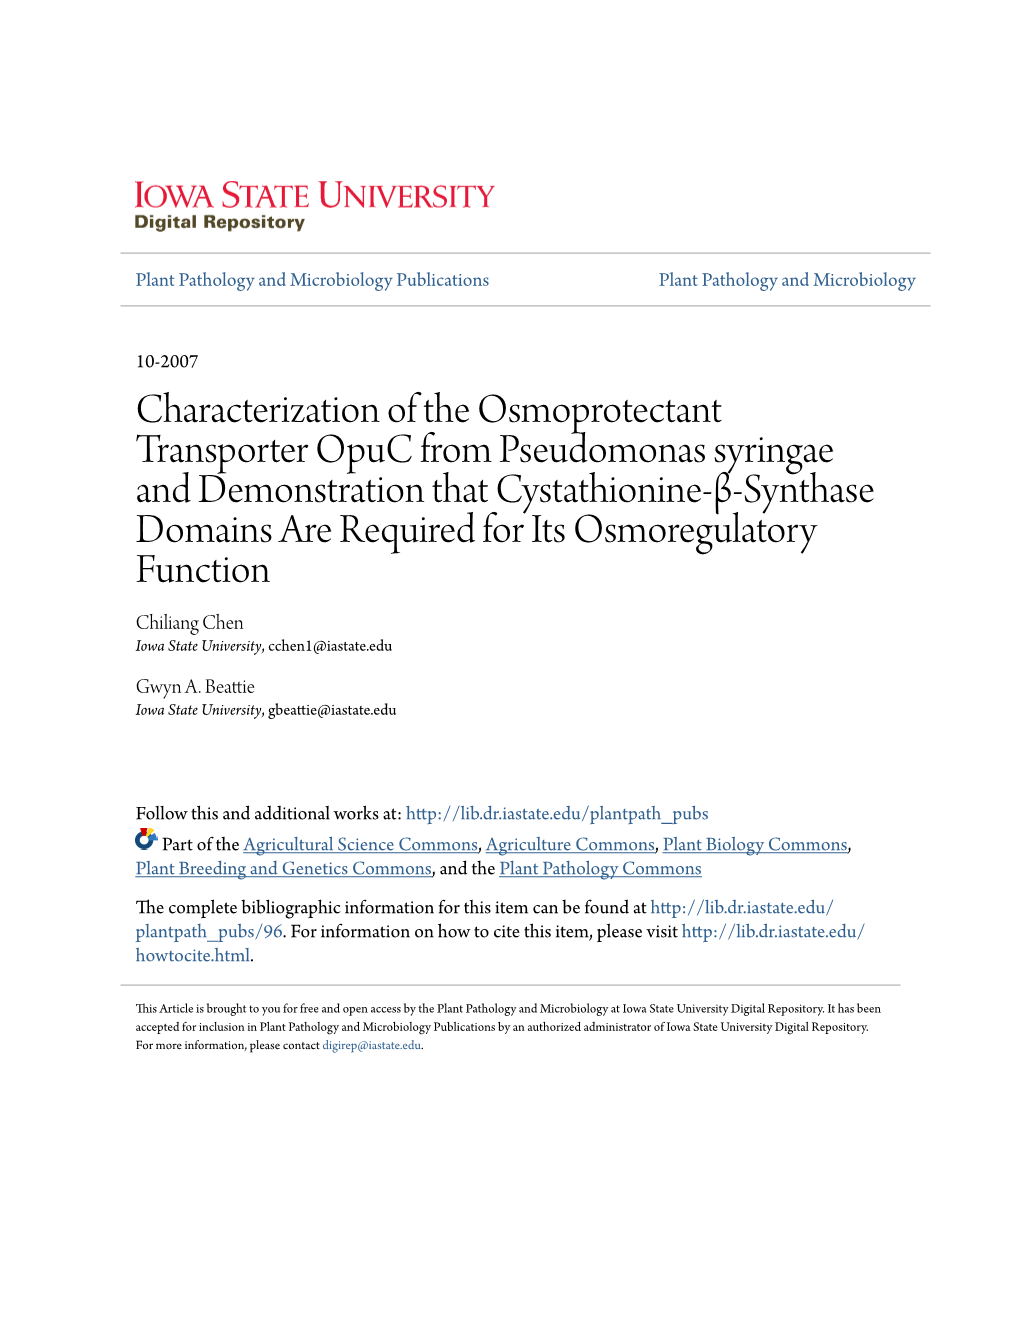 Characterization of the Osmoprotectant Transporter Opuc